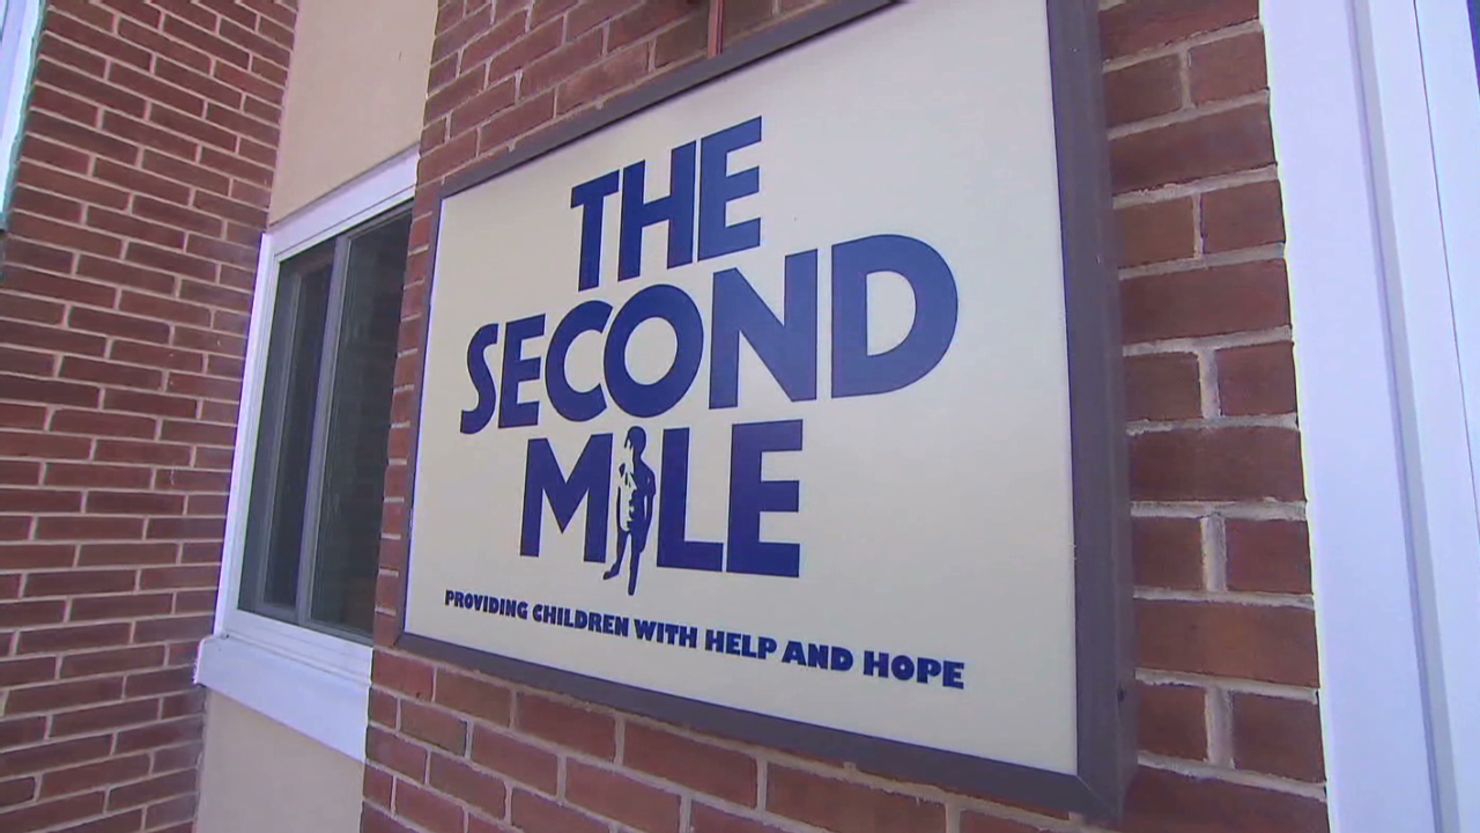 Second Mile's acting CEO said the charity is working with donors and others to determine its projected support level.